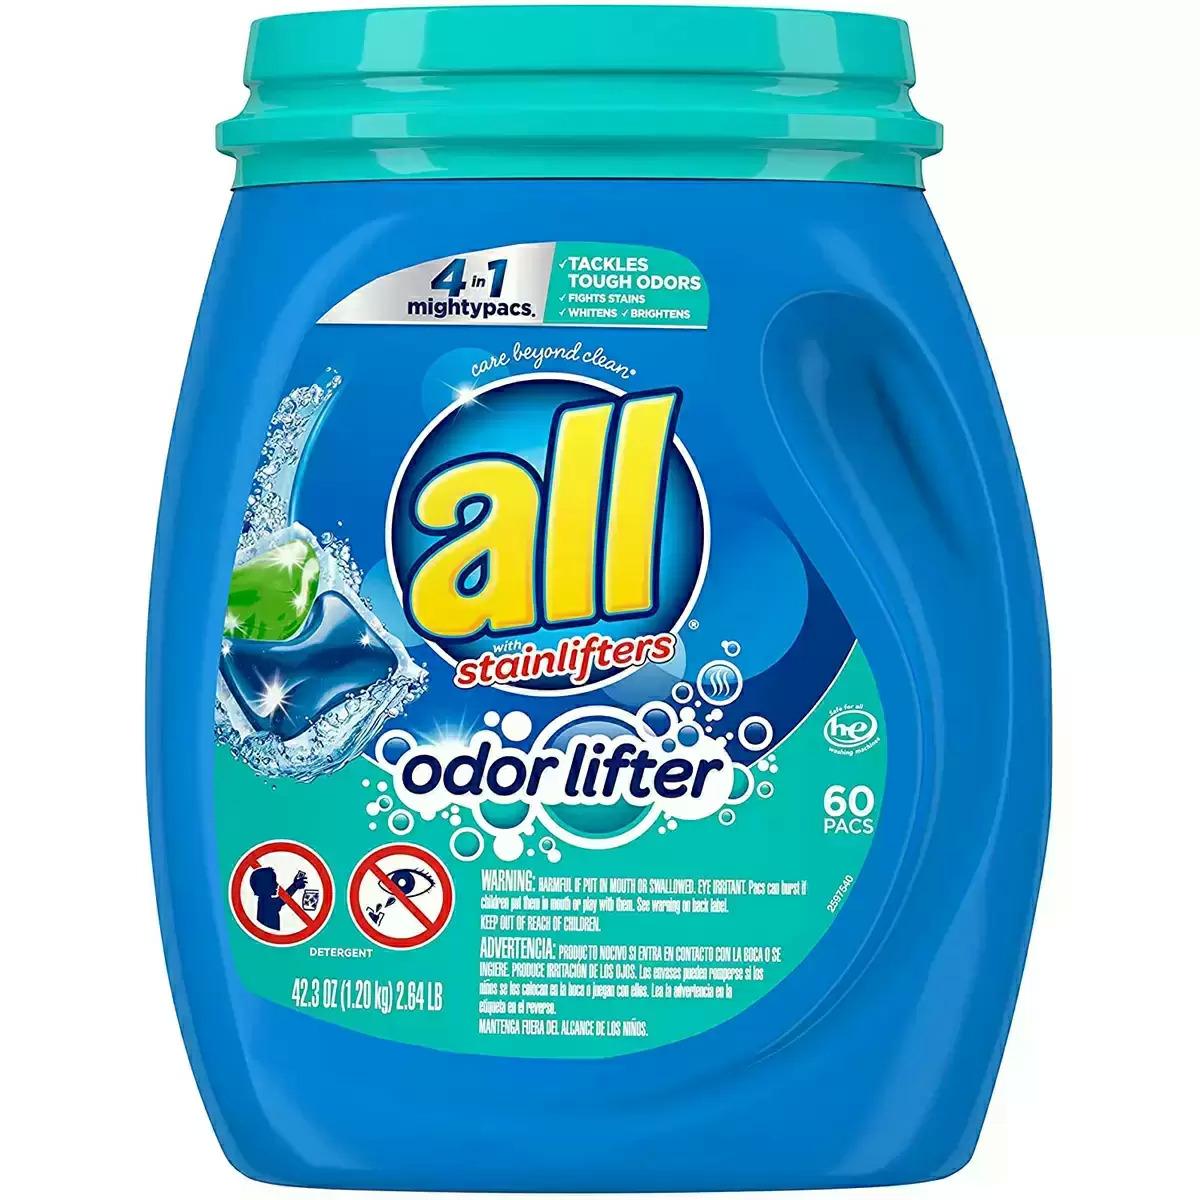 60 All Mighty 4-in-1 Laundry Detergent Pacs for $6.96